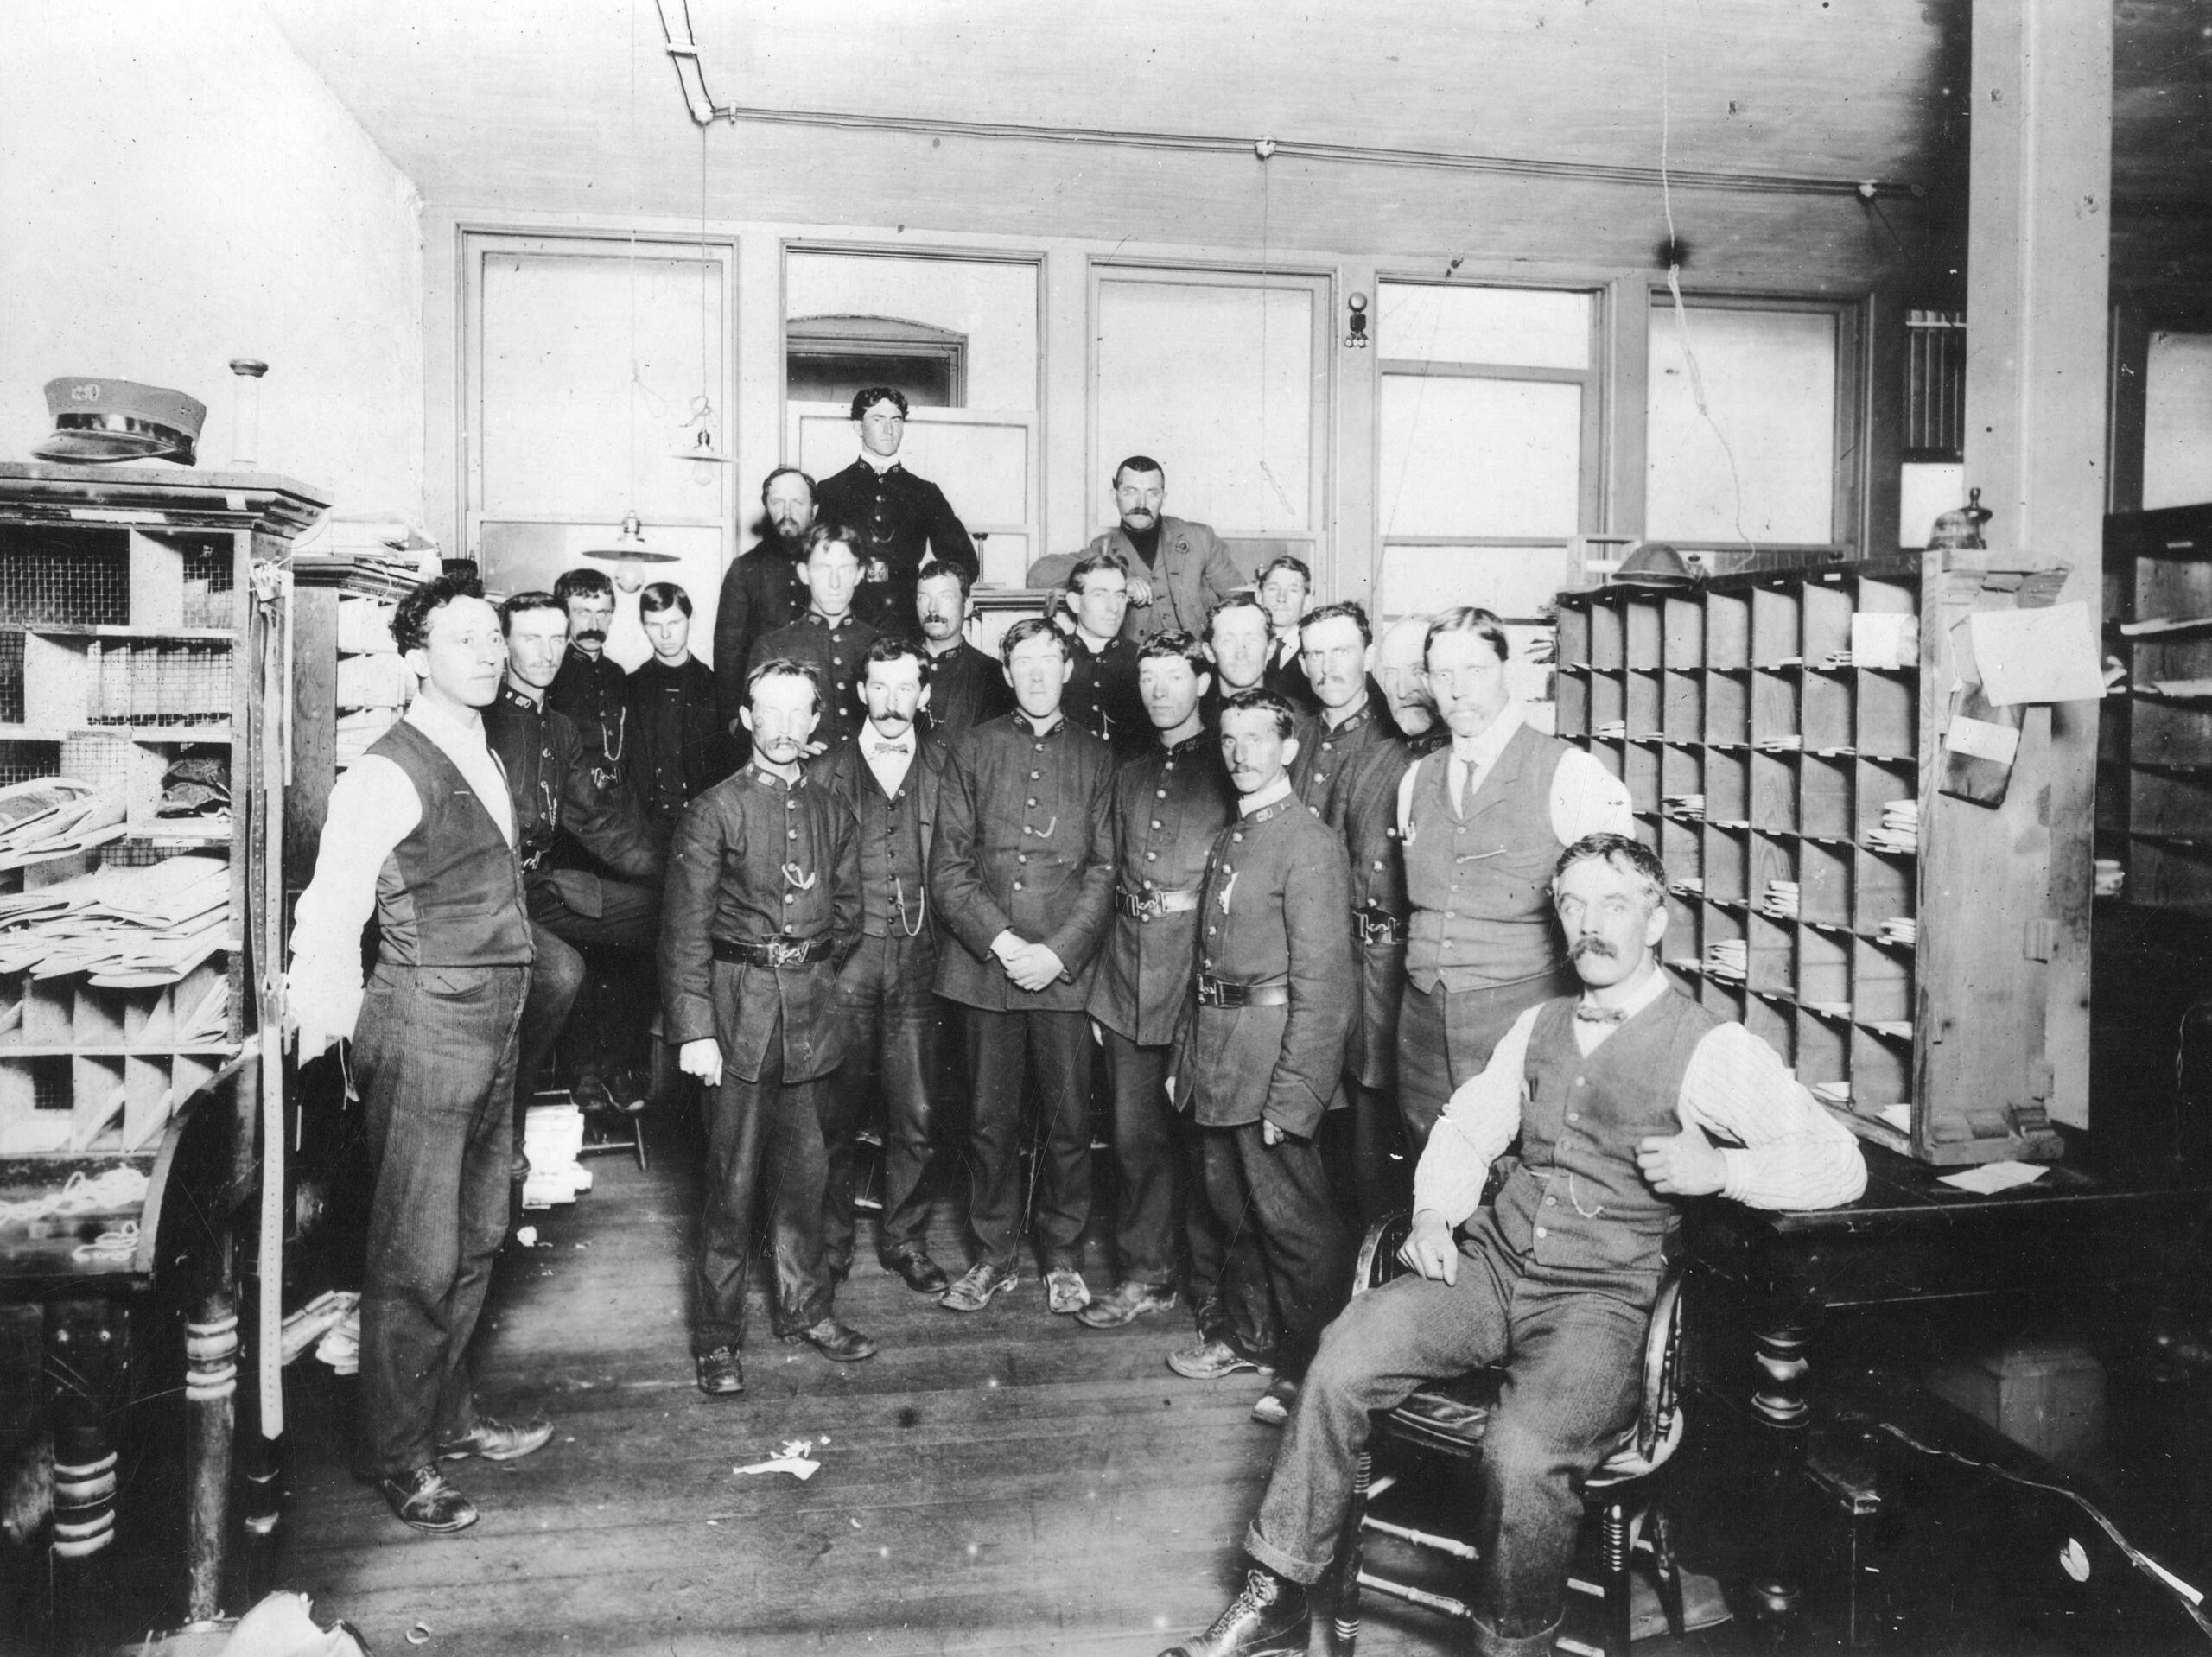 Vancouver Supports Letter Carriers’ Demand for $2 per Day – March 14, 1898